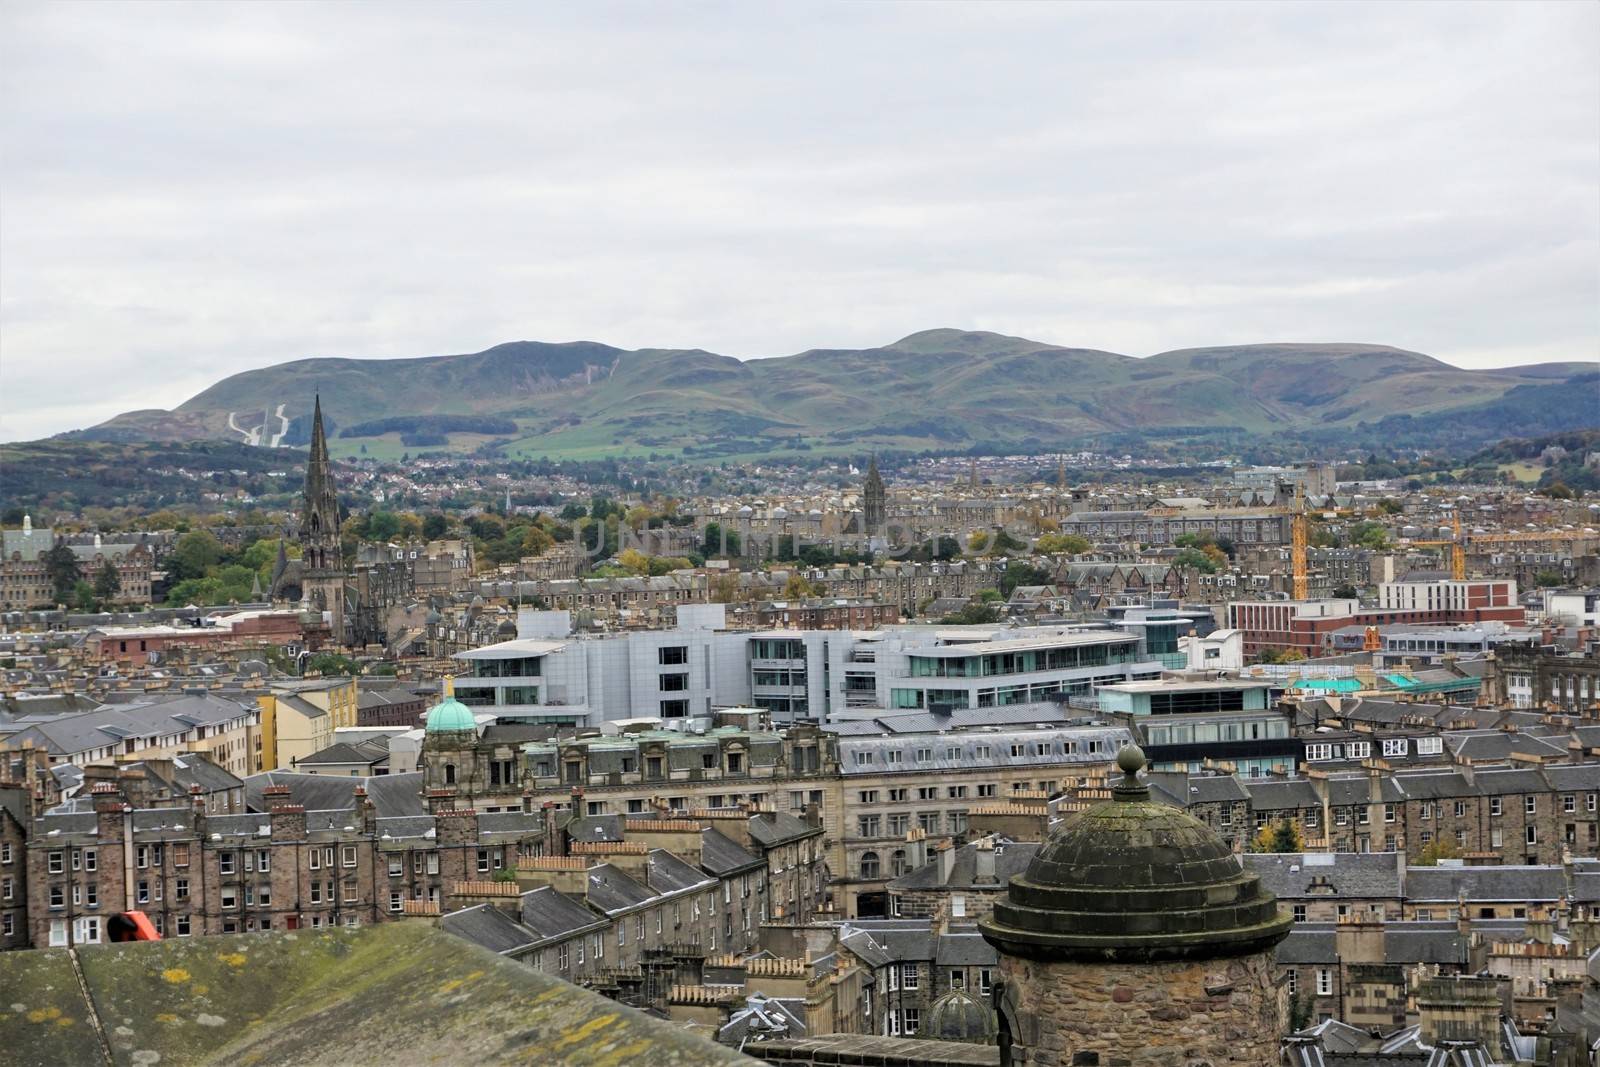 View over Edinburgh to the hills from the castle